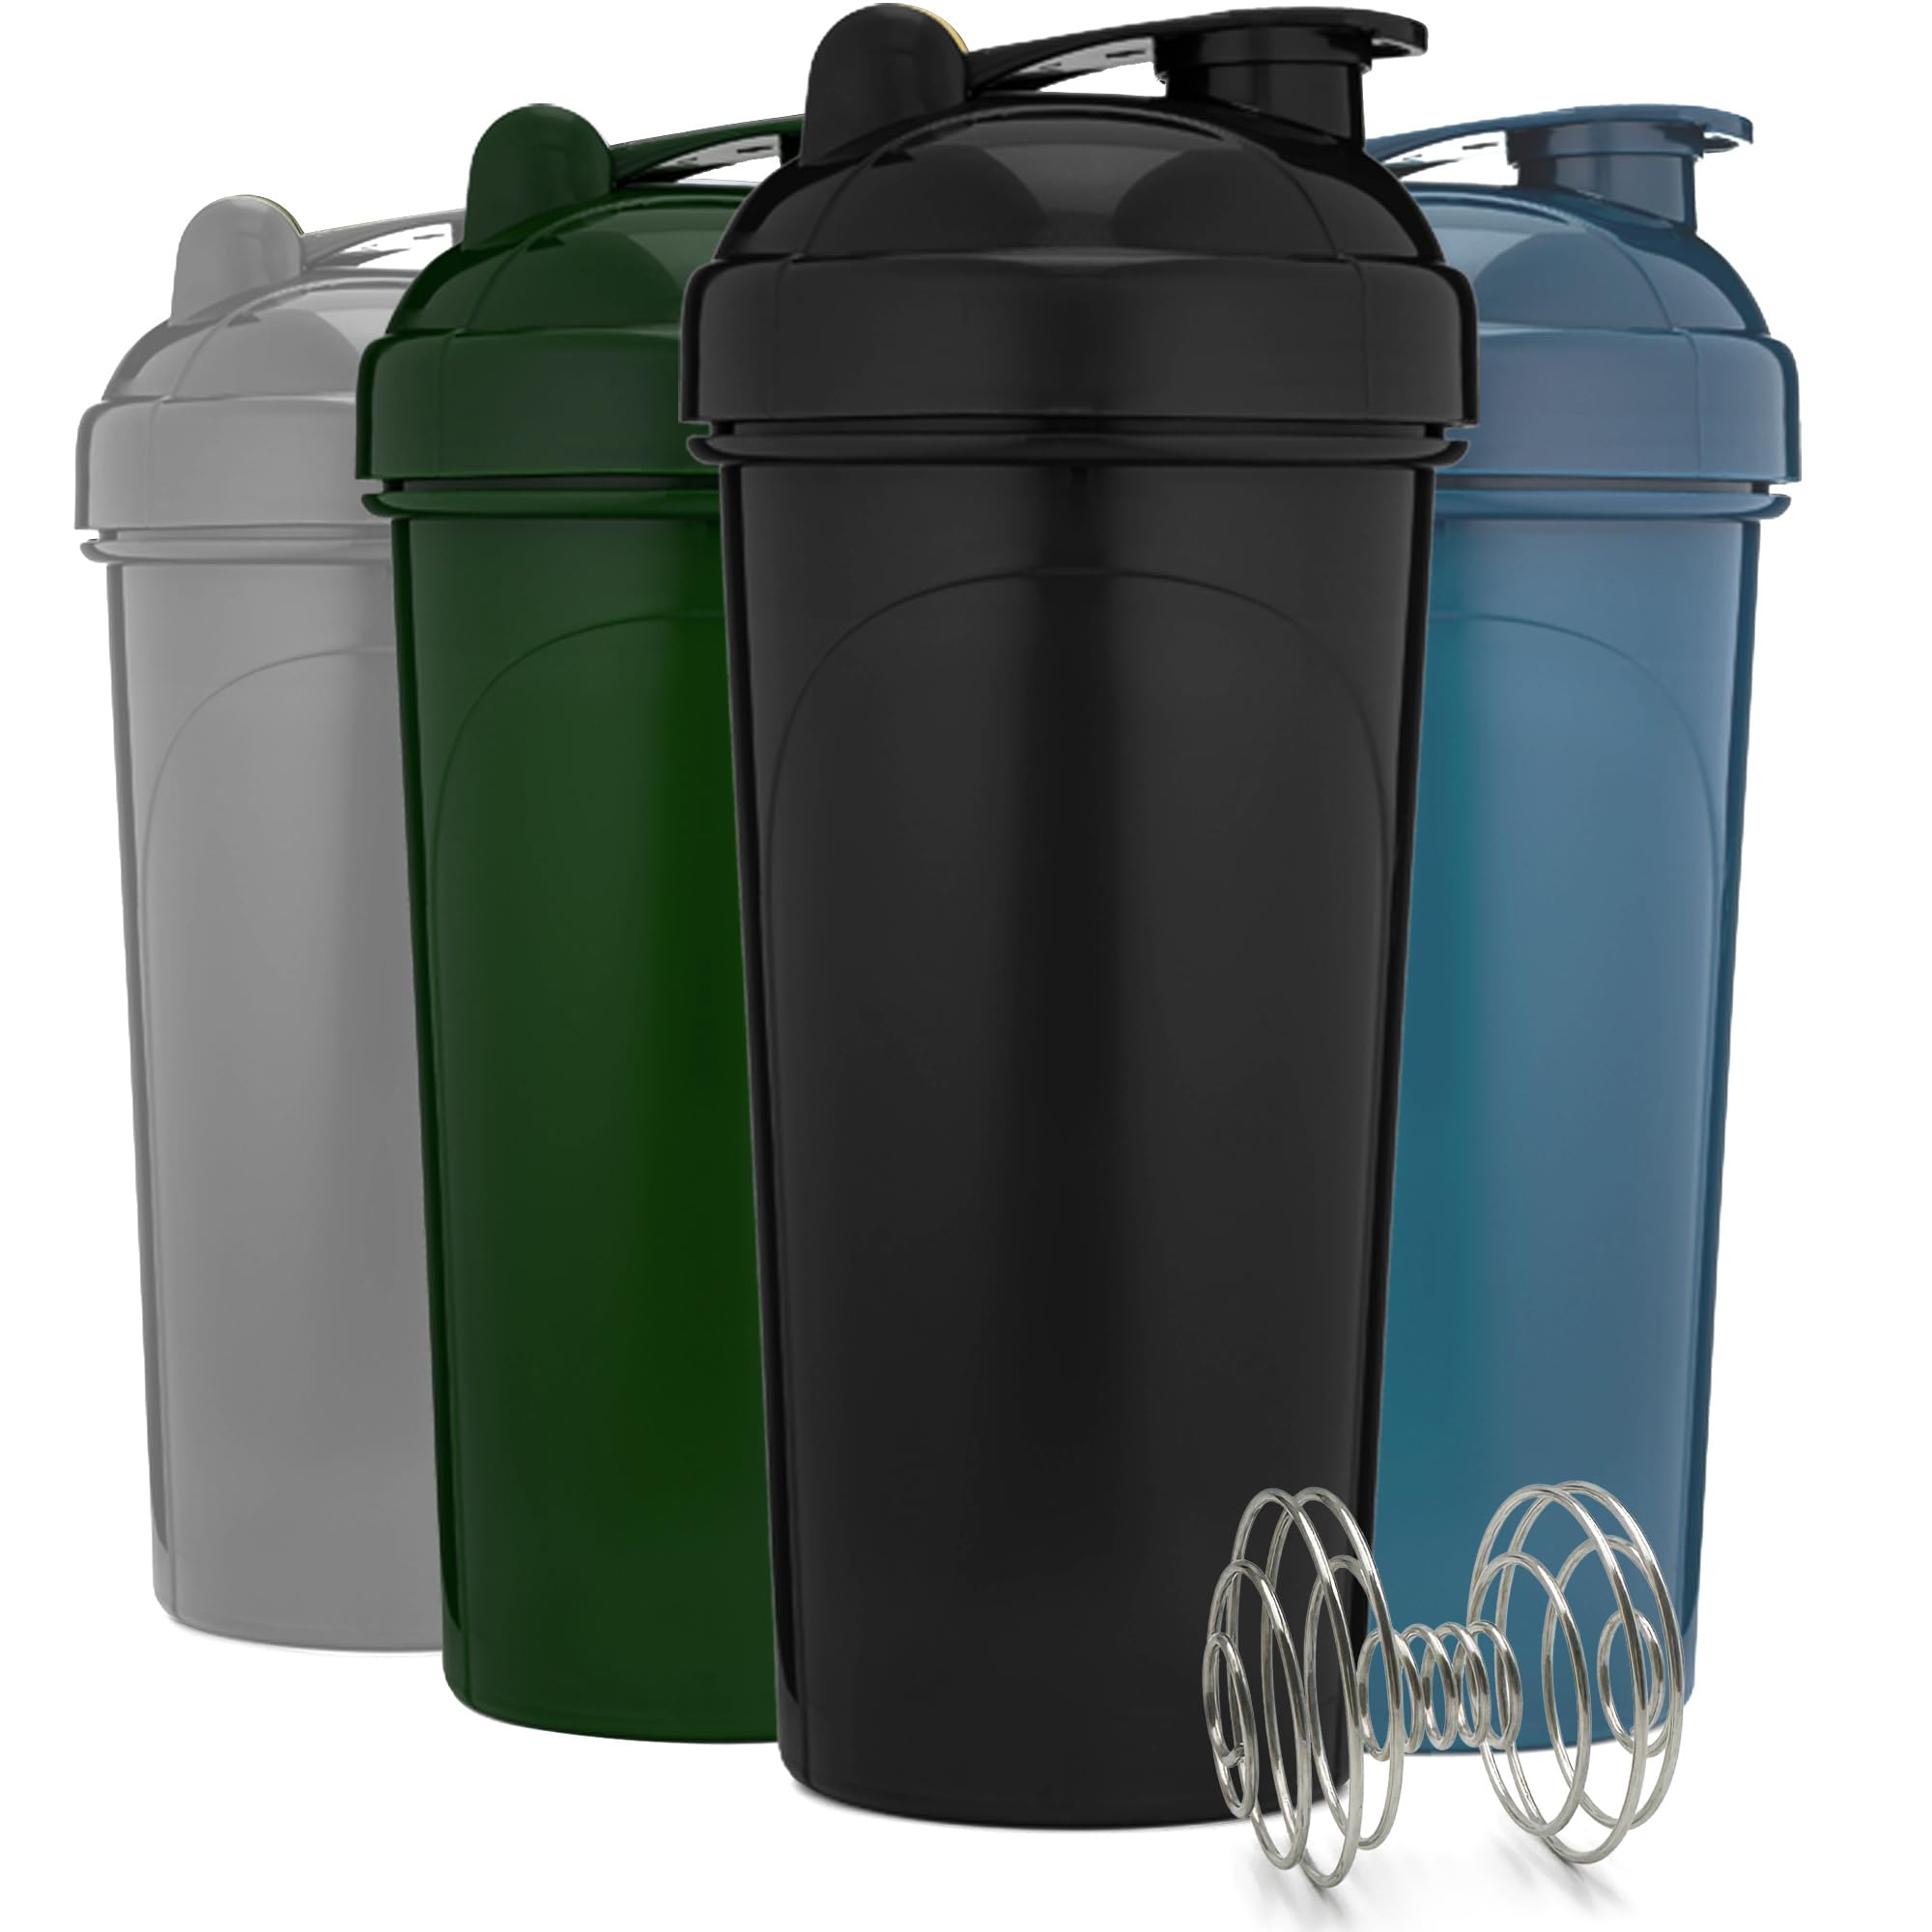 Super Hydro Protein Shaker Bottle [3 PACK] - 28 Oz. BPA-Free, Dishwasher  Safe Shakers For Protein Sh…See more Super Hydro Protein Shaker Bottle [3